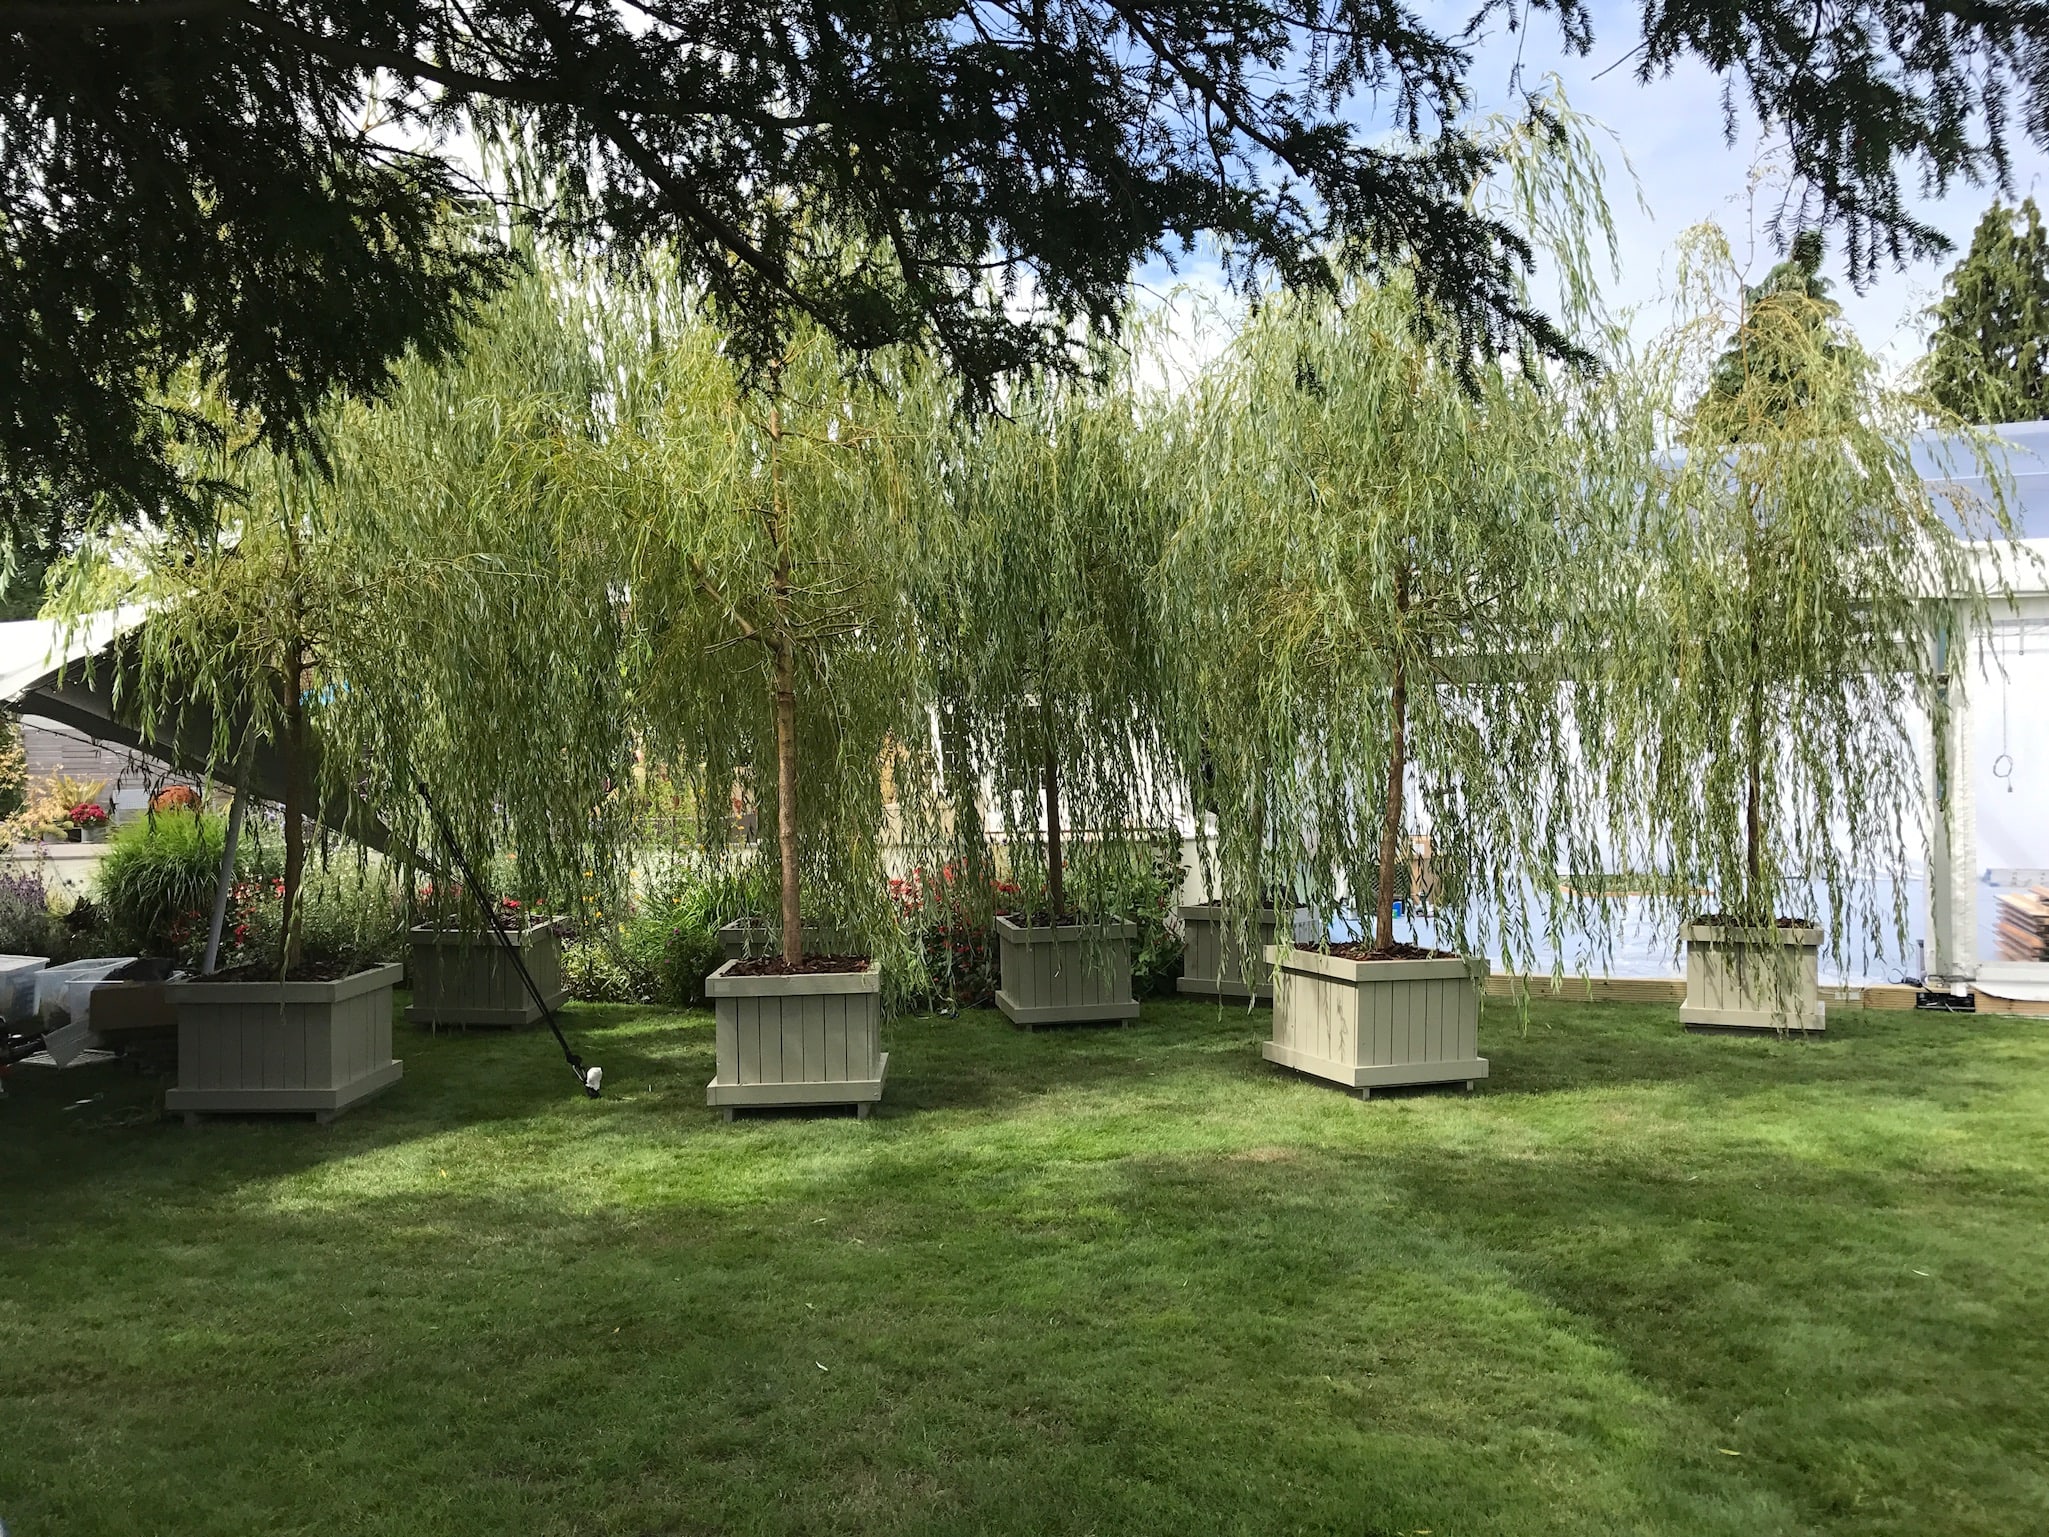 rental willow trees on grass by a lake